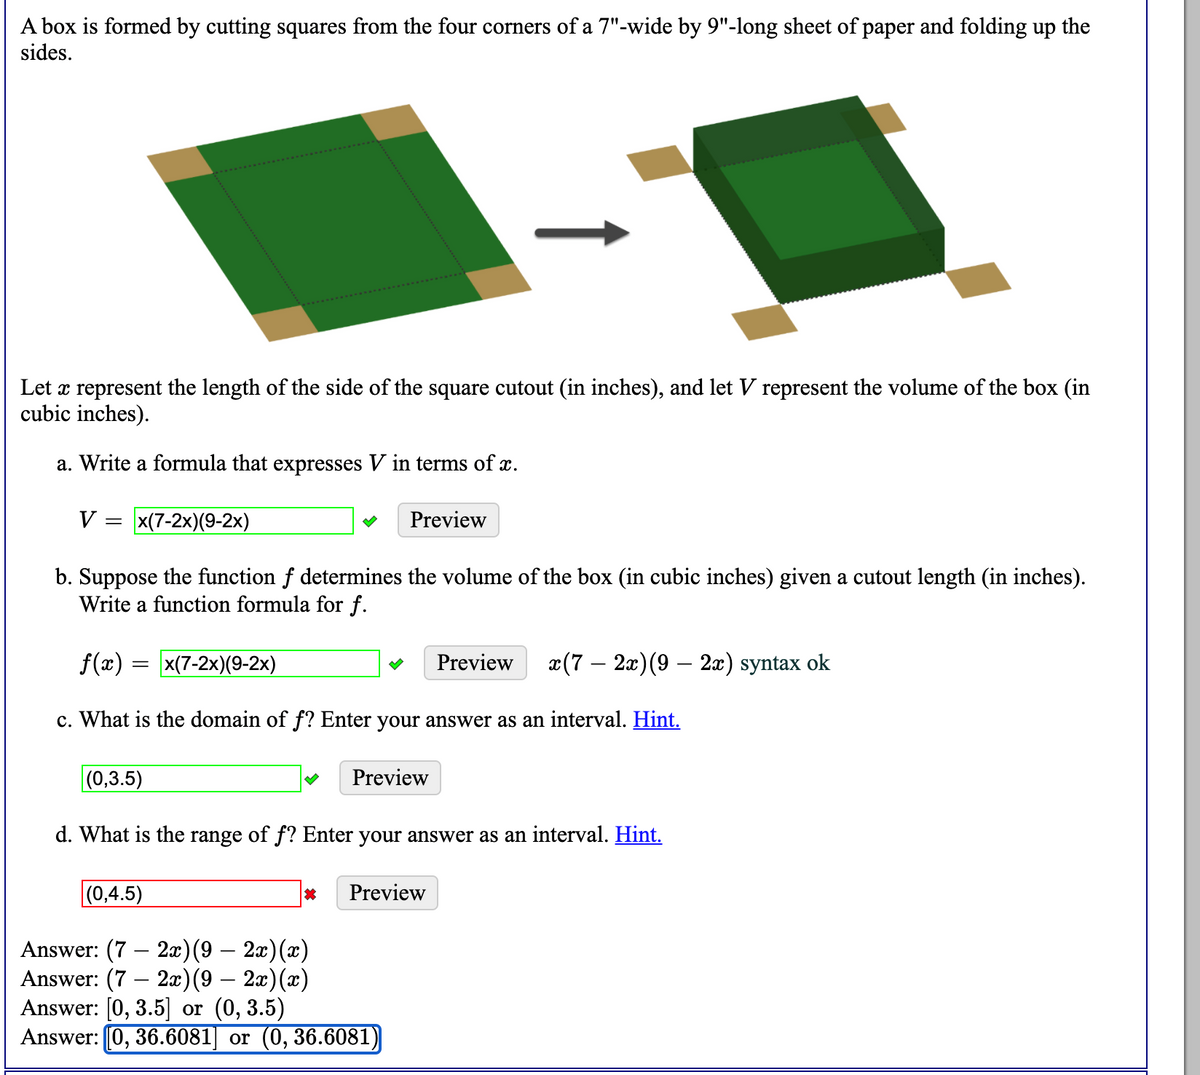 A box is formed by cutting squares from the four corners of a 7"-wide by 9"-long sheet of paper and folding up the
sides.
Let x represent the length of the side of the square cutout (in inches), and let V represent the volume of the box (in
cubic inches).
a. Write a formula that expresses V in terms of x.
V = x(7-2x)(9-2x)
Preview
b. Suppose the function f determines the volume of the box (in cubic inches) given a cutout length (in inches).
Write a function formula for f.
f(x) = x(7-2x)(9-2x)
Preview
x(7 – 2x)(9 – 2x) syntax ok
c. What is the domain of f? Enter your answer as an interval. Hint.
(0,3.5)
Preview
d. What is the range of f? Enter your answer as an interval. Hint.
(0,4.5)
Preview
Answer: (7 – 2æ)(9 – 2x)(x)
Answer: (7 – 2æ)(9 – 2x)(x)
Answer: [0, 3.5] or (0, 3.5)
Answer: 0, 36.6081] or (0, 36.6081)
|
